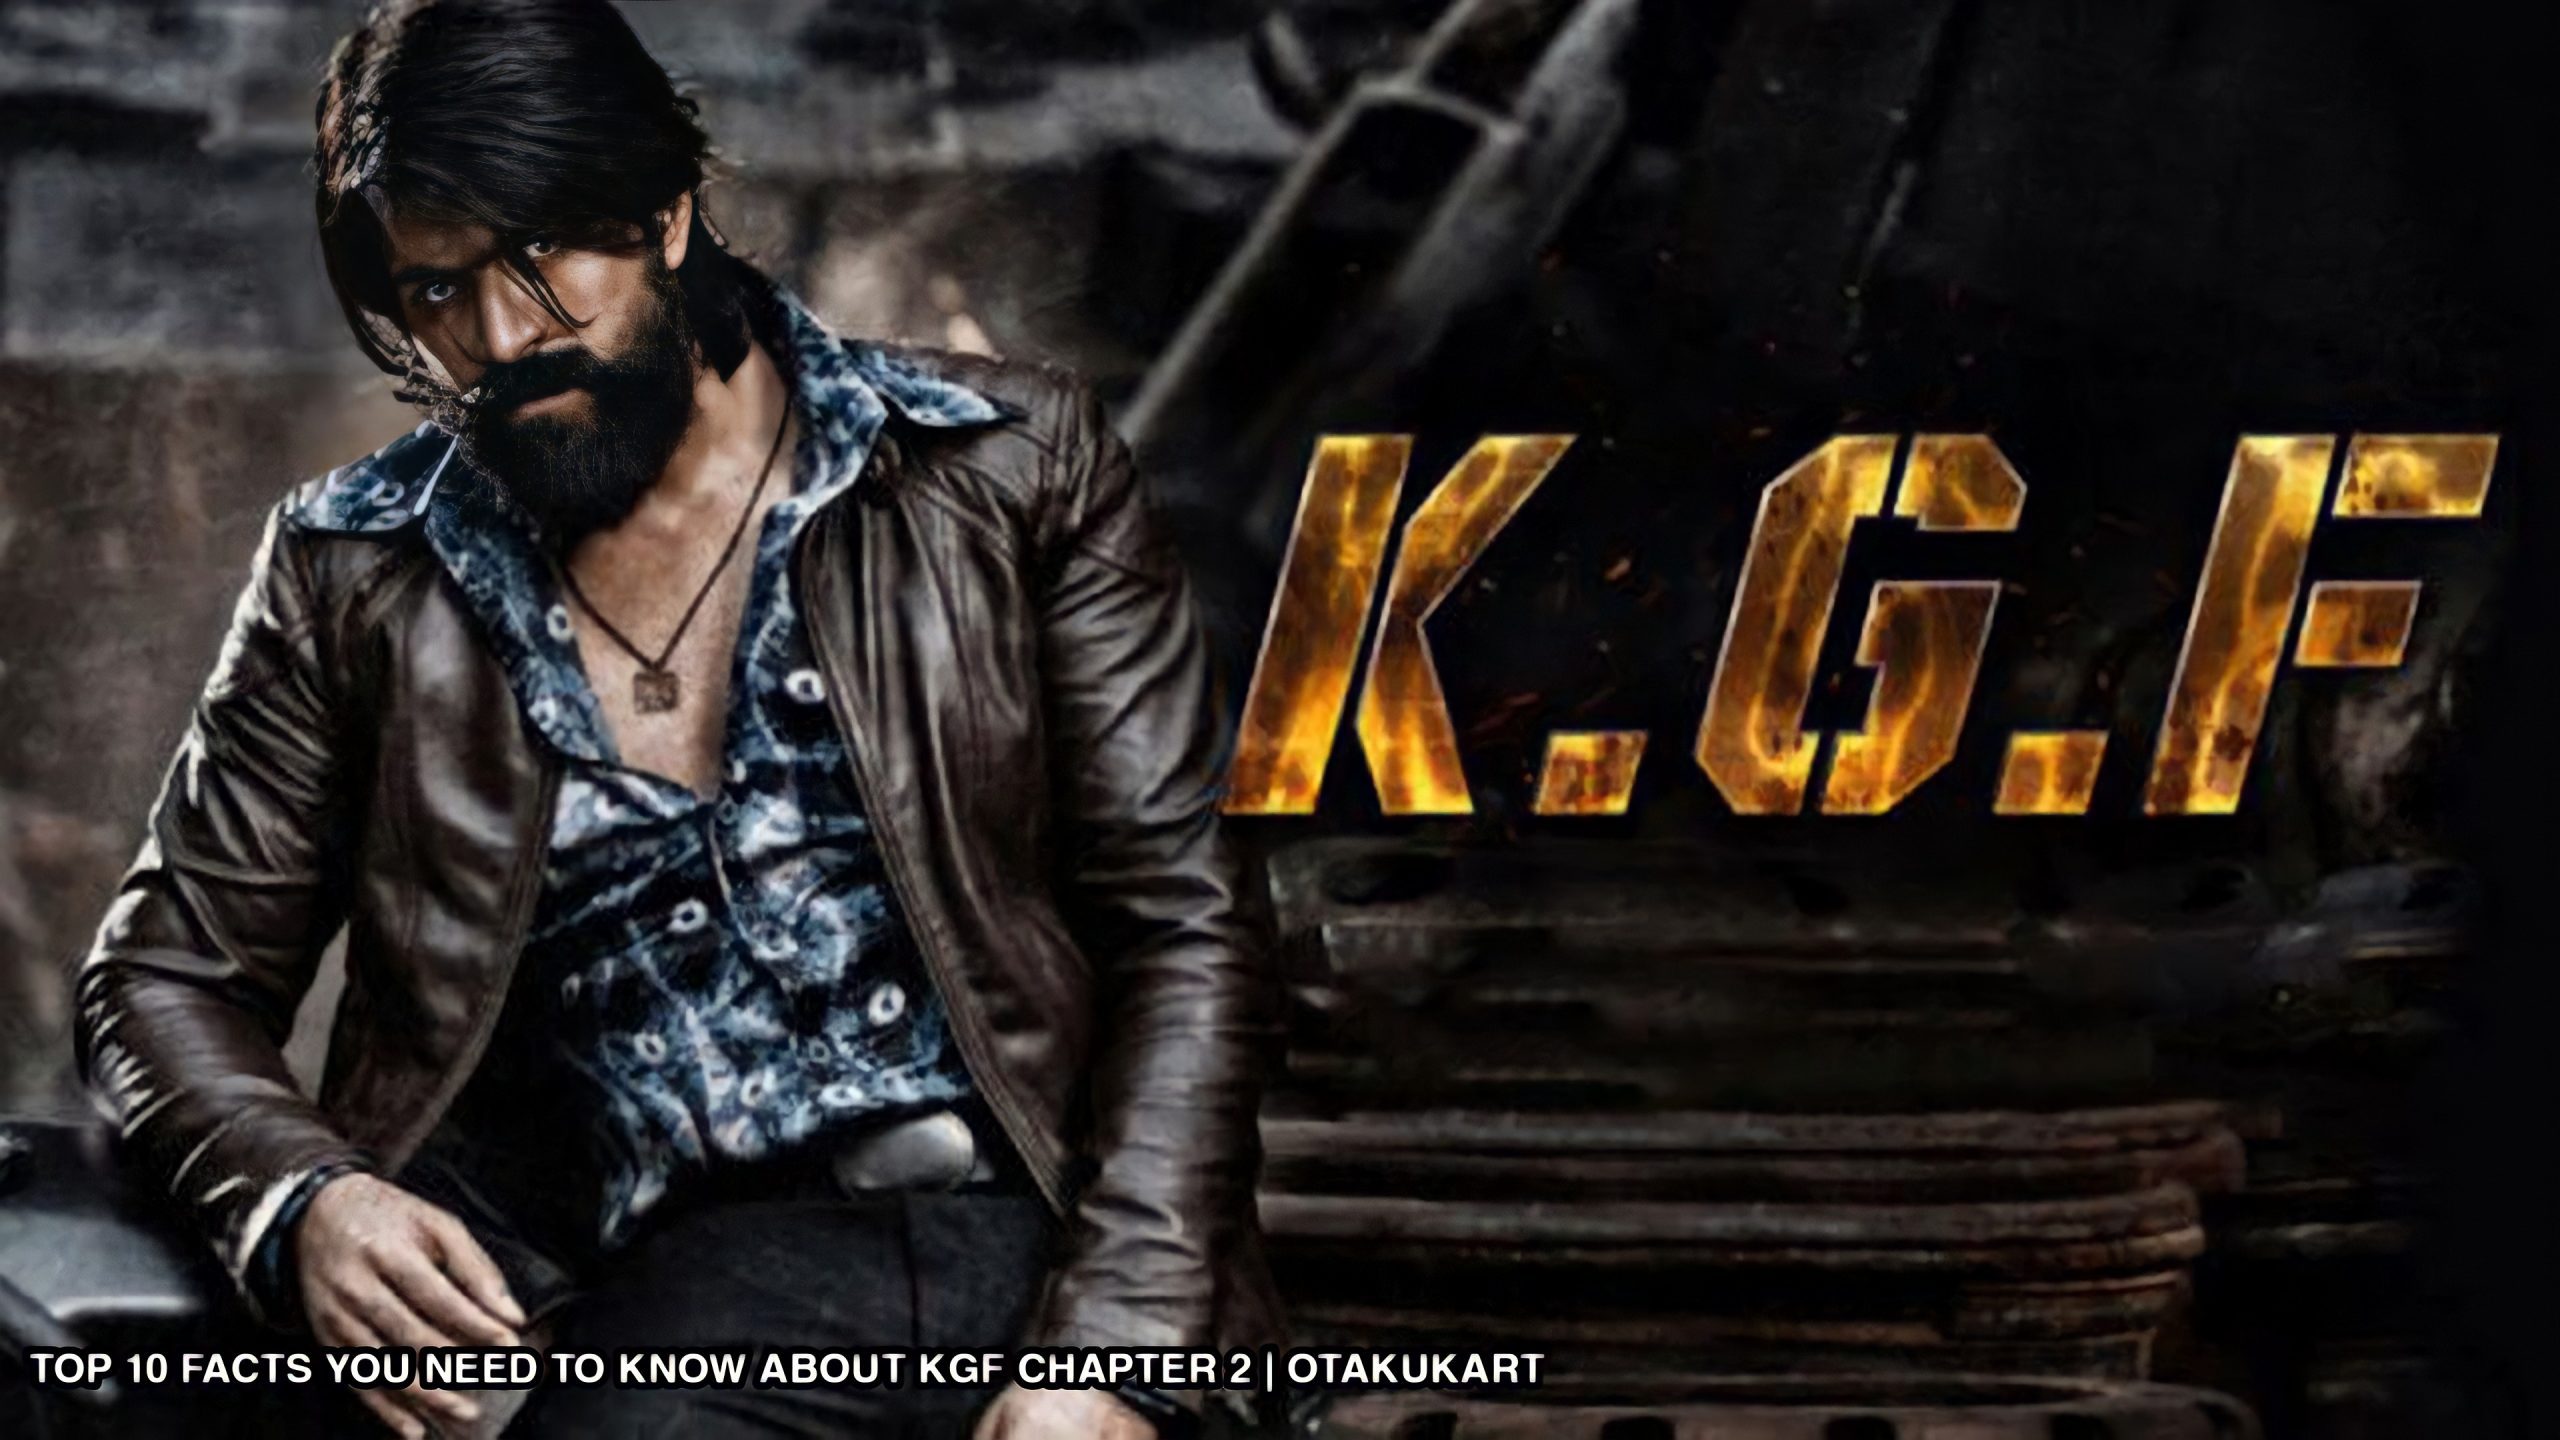 Top 10 Facts That You Need To Know About KGF Chapter 2